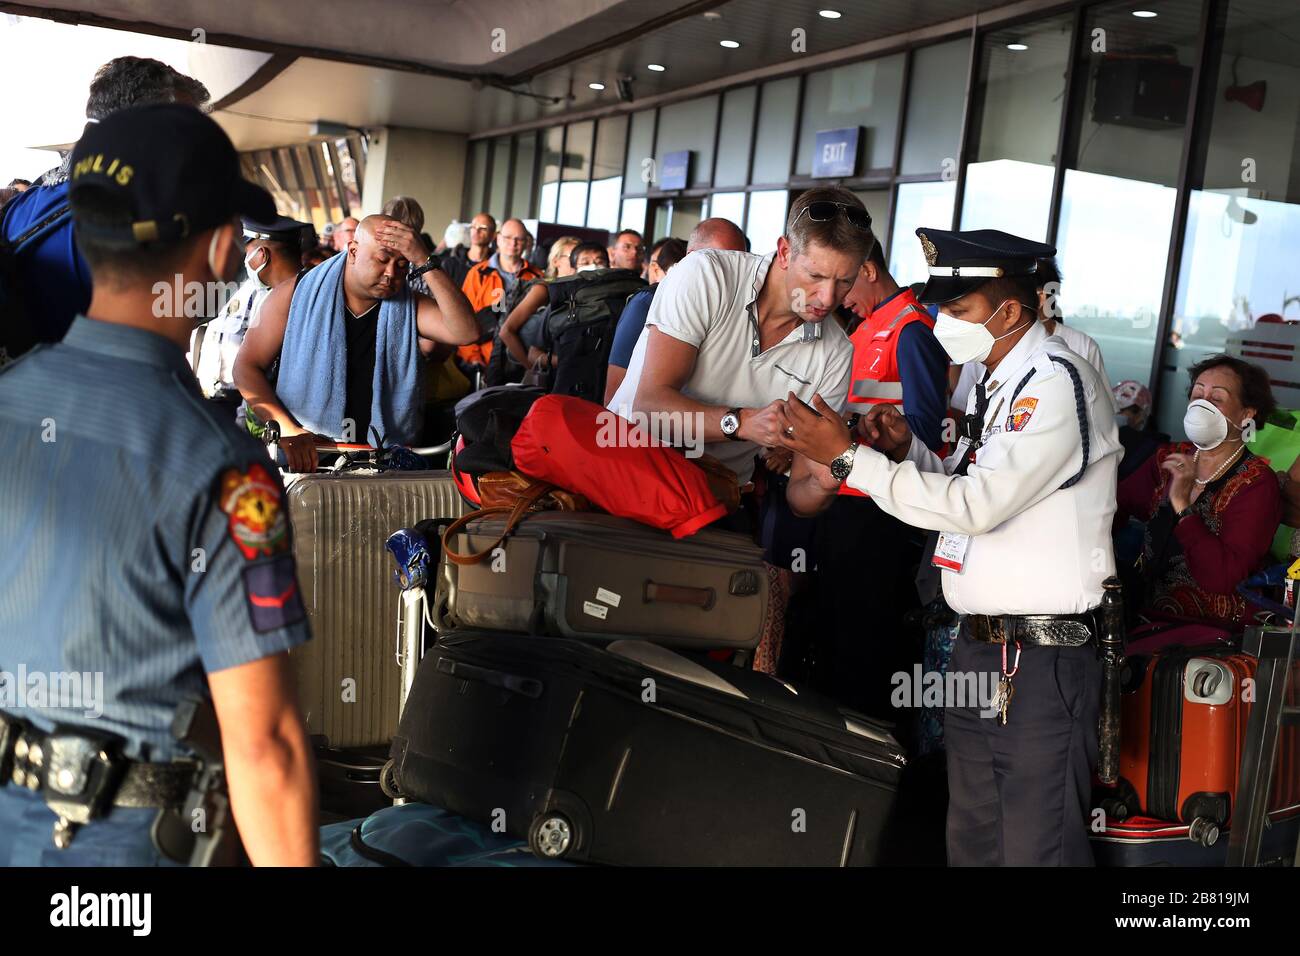 Manila, Philippines. 19th Mar, 2020. There are tourists at the airport. More than 300 Germans are waiting at Ninoy Aquino International Airport for a Lufthansa flight chartered by the German Embassy in the Philippines because of the Covid 19 pandemic. Credit: Alejandro Ernesto//Alejandro Ernesto/DPA/Alamy Live News Stock Photo